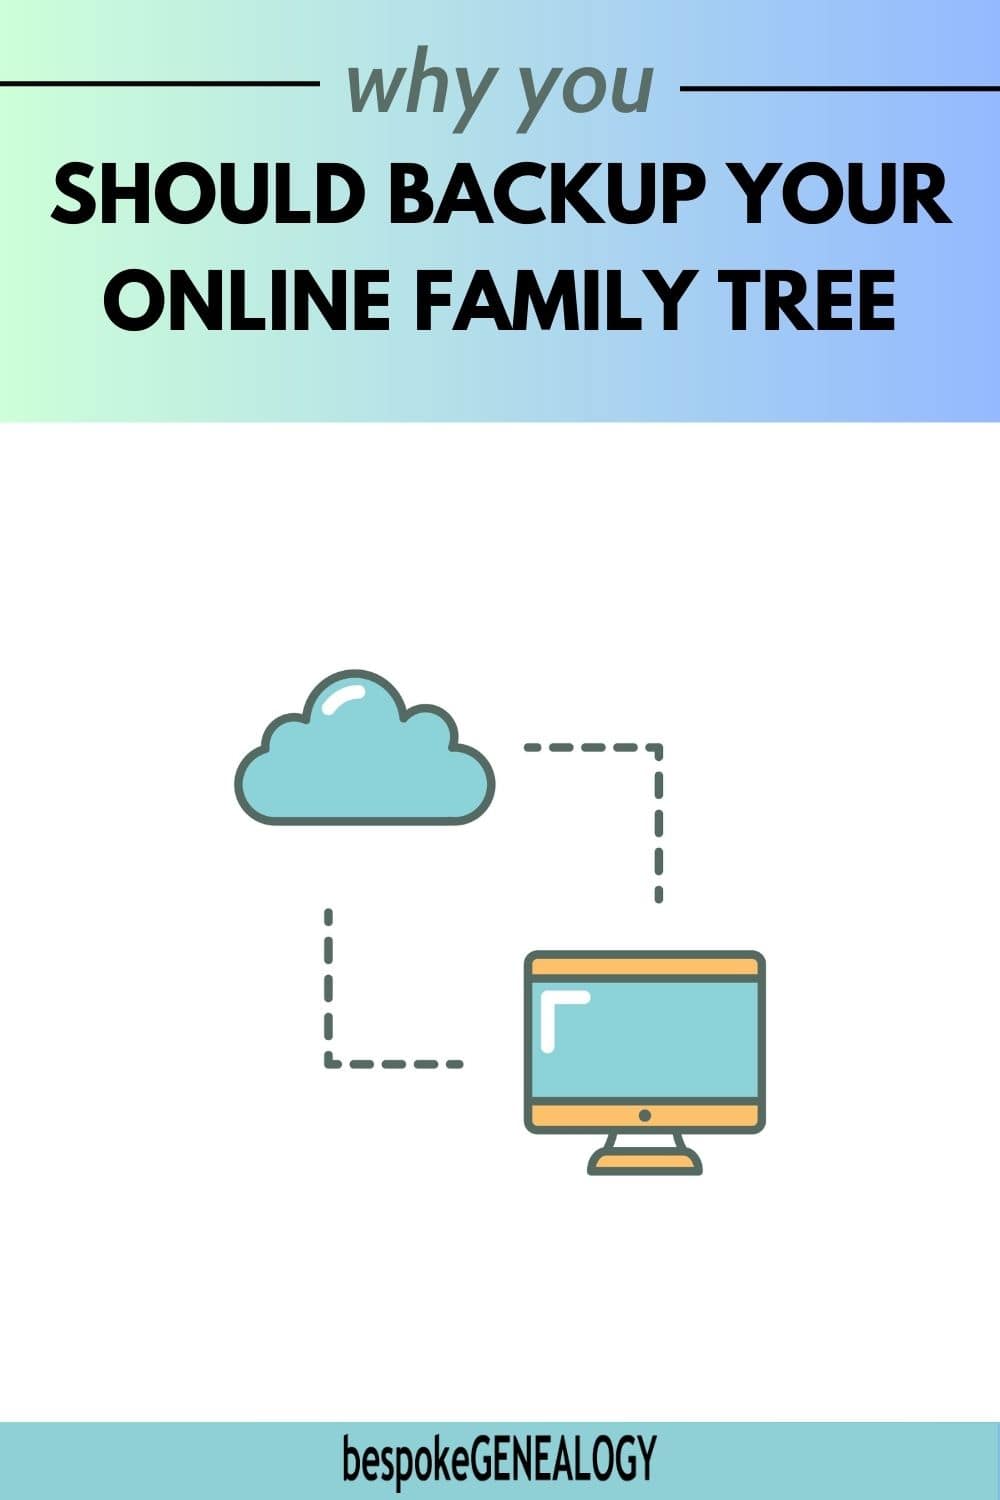 Why you should backup your online family tree. Graphic of a computer linked to a cloud symbol